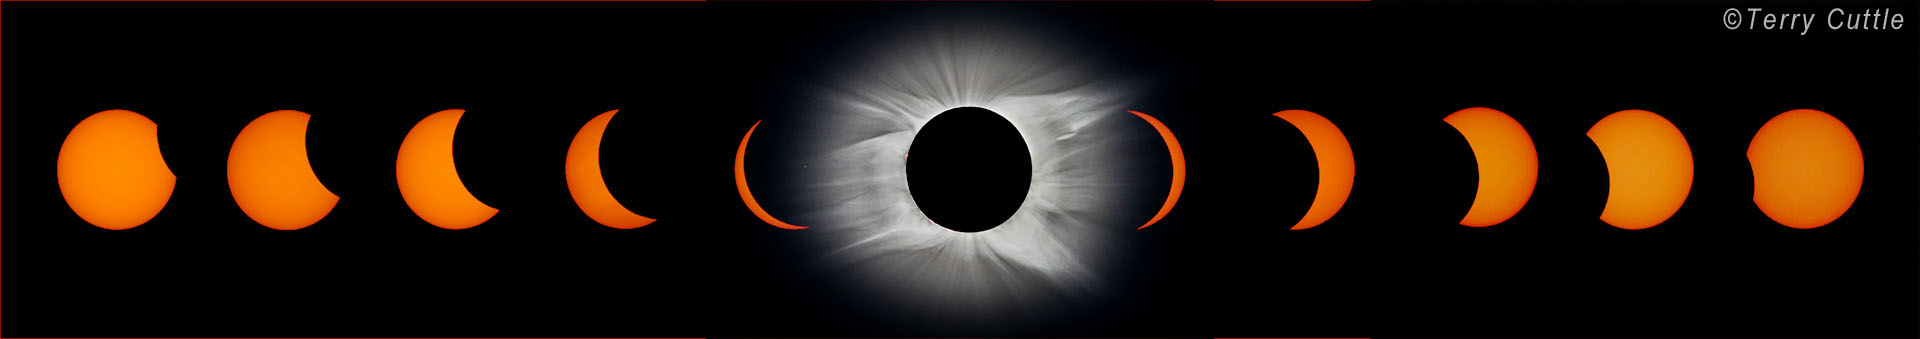 Composite photo of a sequence of 11 images of the Moon progressively moving across the face of the Sun. The first five images are of the Sun being progressively covered up by the Moon. The middle image is the Sun totally eclipsed by the Moon and showing the Sun’s corona surrounding the Sun. The last five images show the Sun being progressively uncovered as the Moon moves off the Sun.